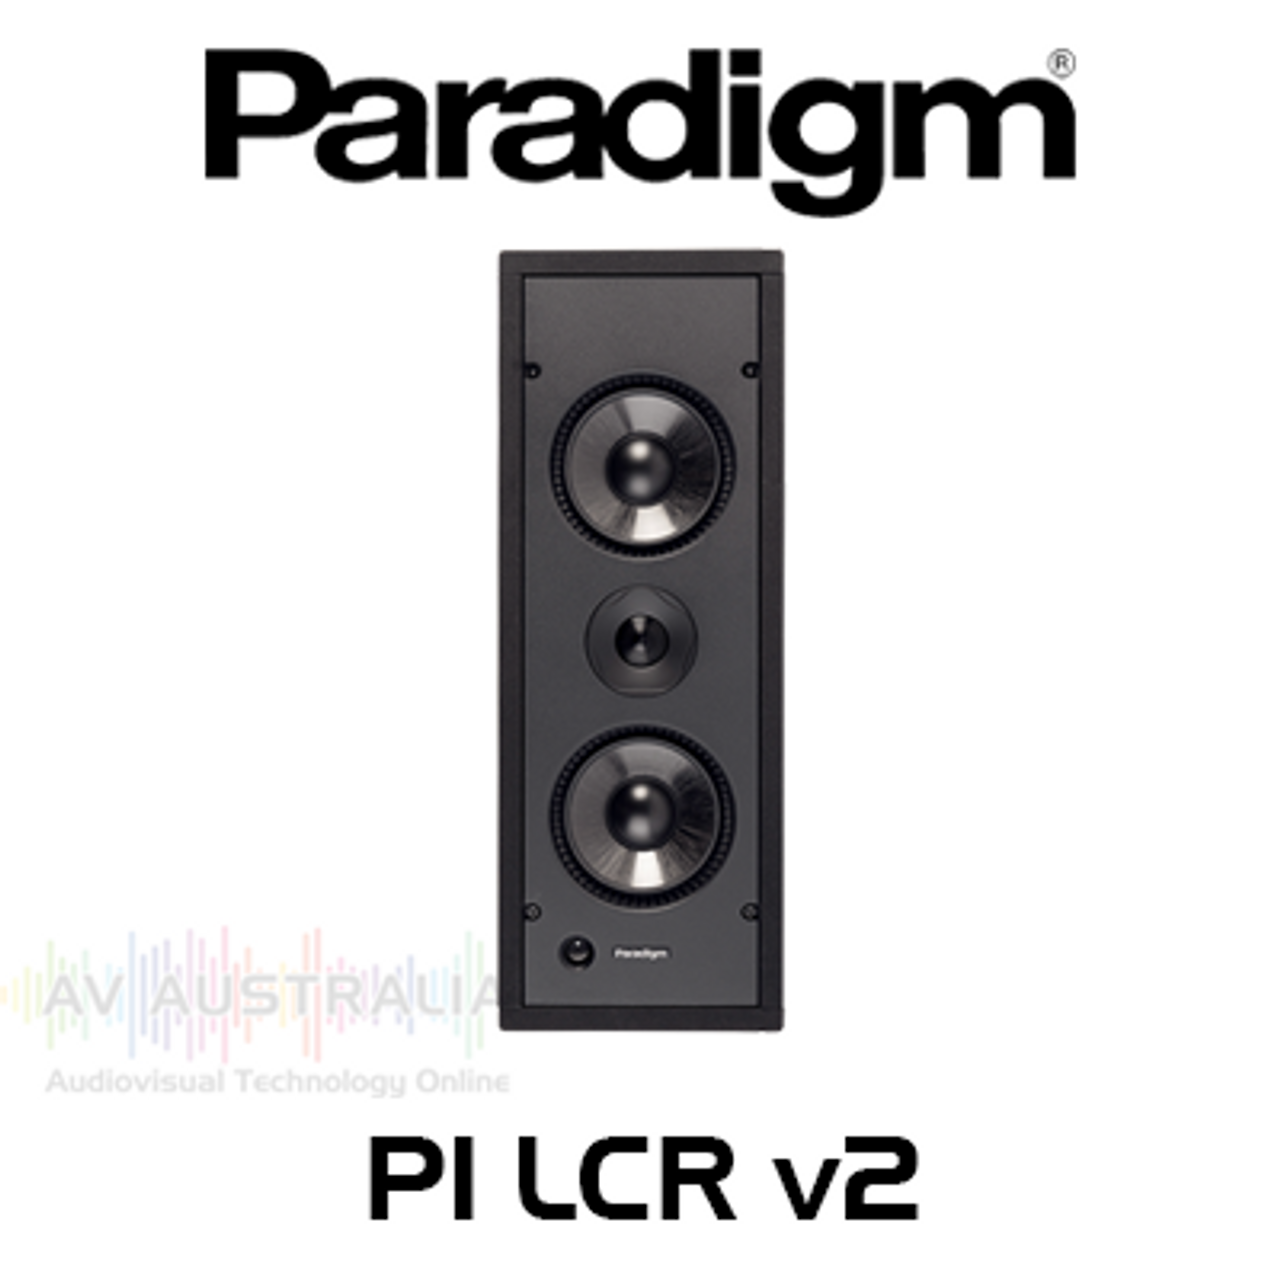 Paradigm CI Pro P1-LCR v2 Dual 5.5" Carbon-X In-Wall LCR Speaker (Each)